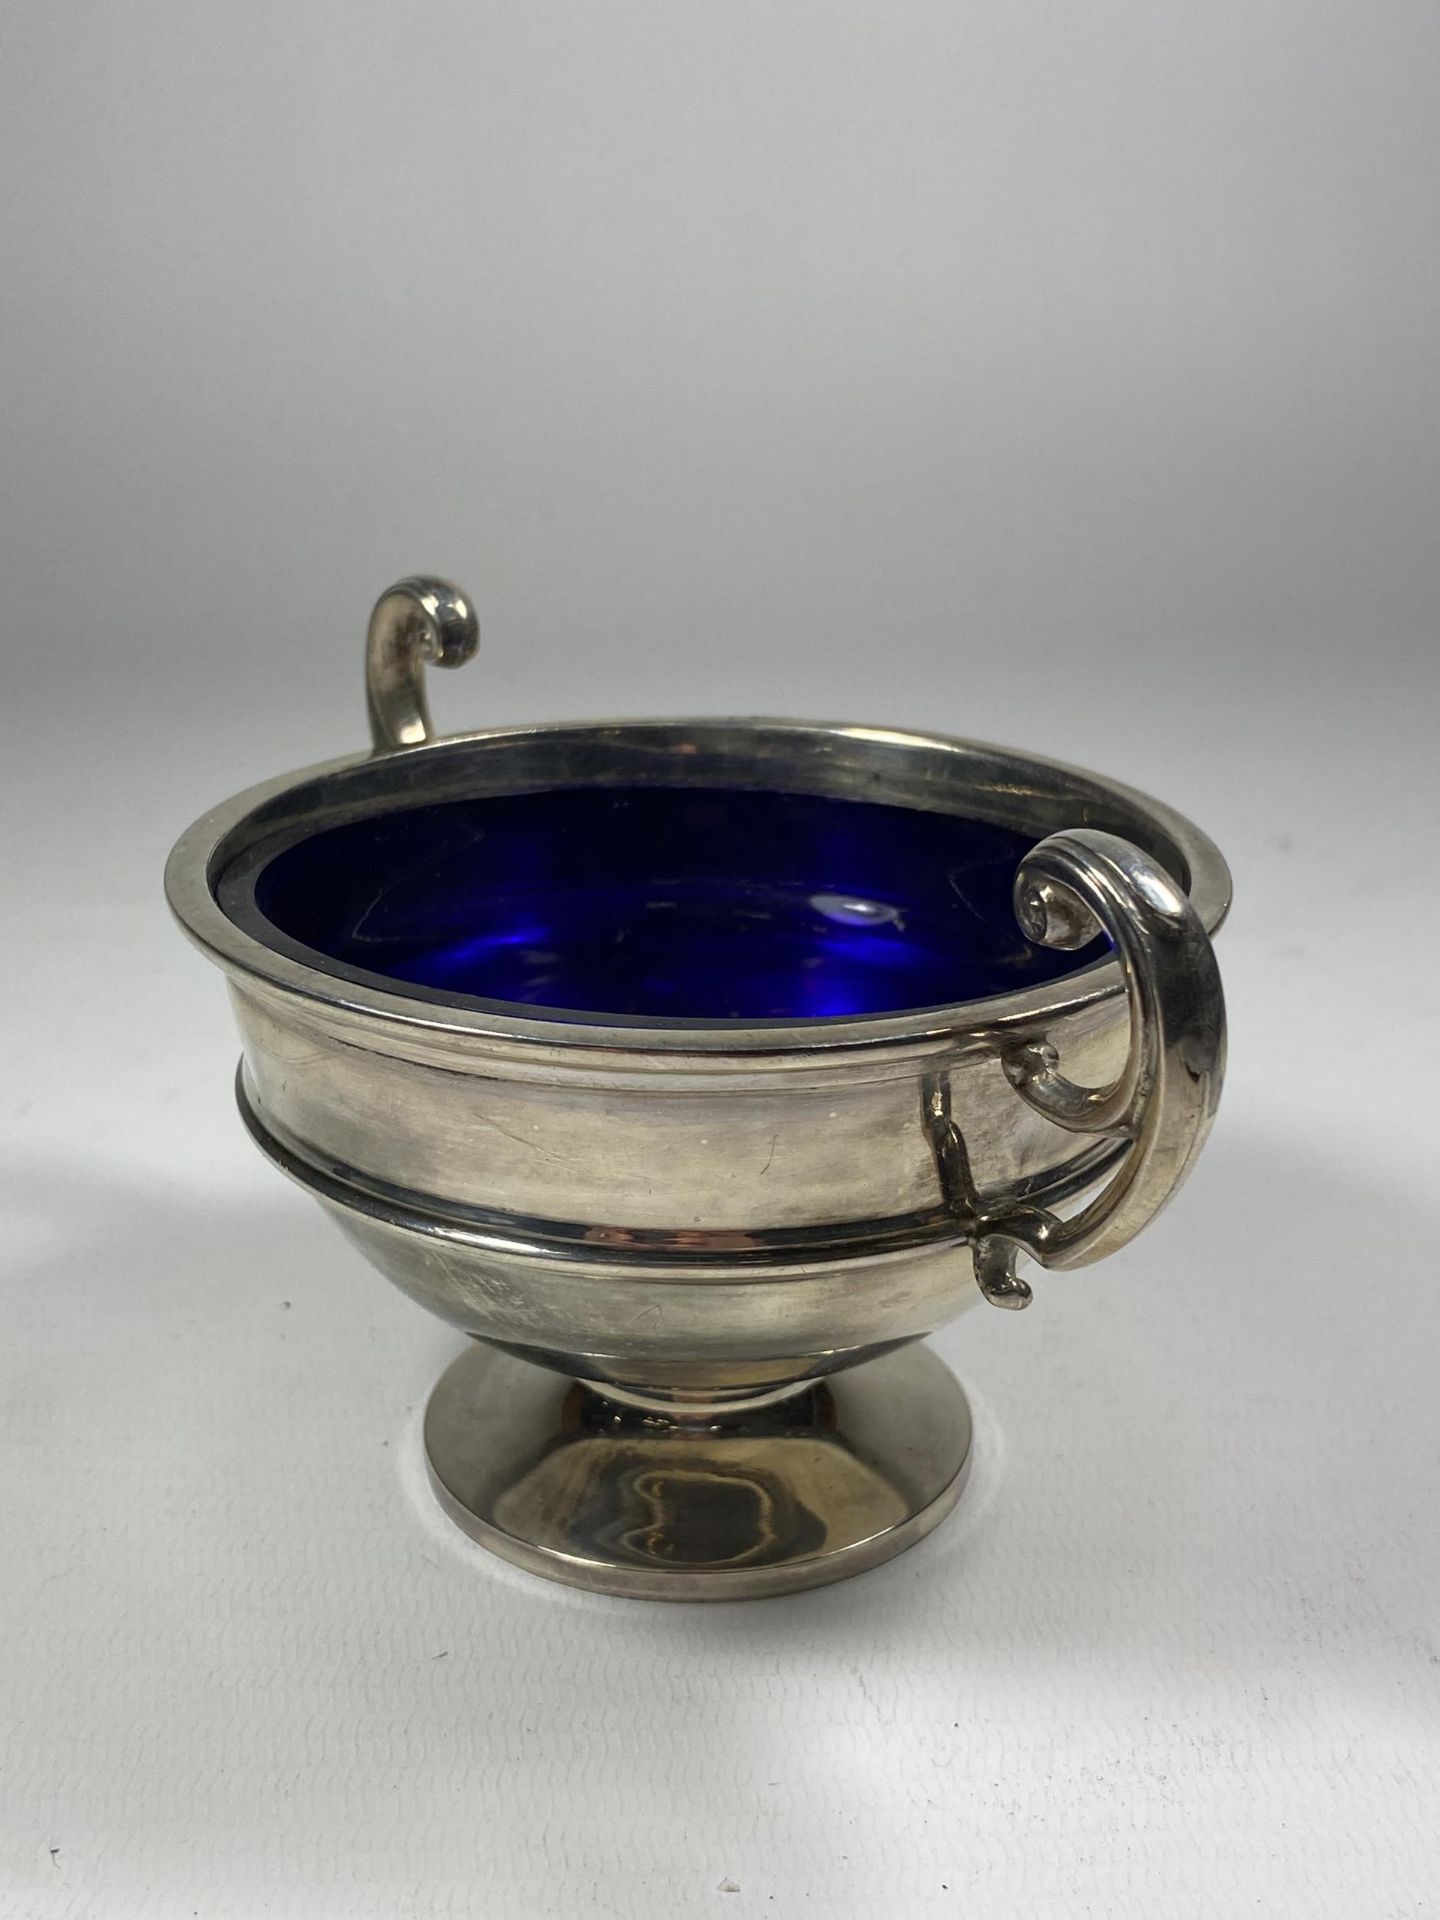 A GEORGE V SILVER TWIN HANDLED PEDESTAL BOWL WITH BLUE GLASS LINER, HALLMARKS FOR BIRMINGHAM, 1913 - Image 2 of 3